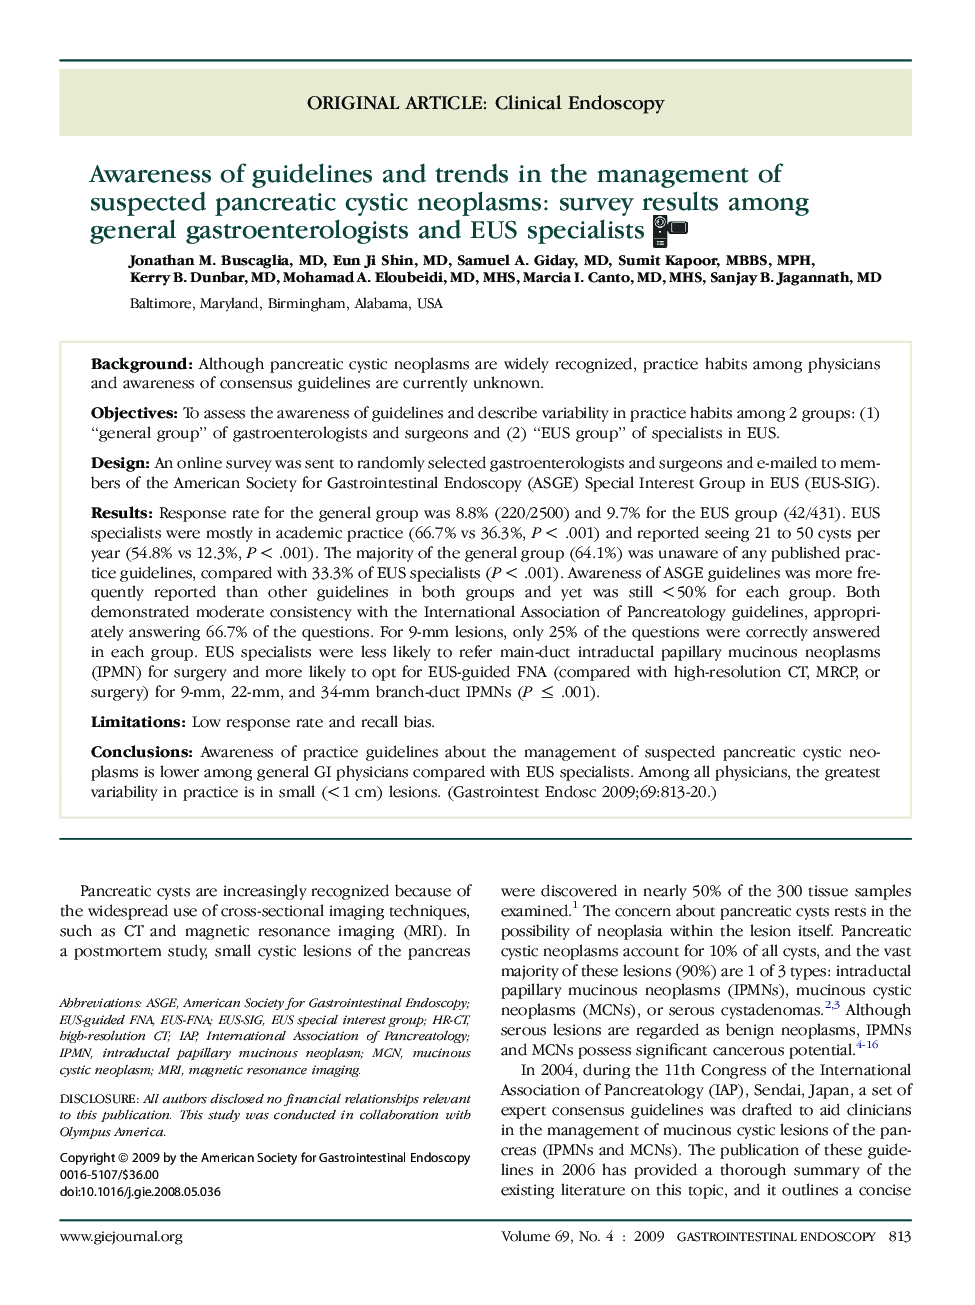 Awareness of guidelines and trends in the management of suspected pancreatic cystic neoplasms: survey results among general gastroenterologists and EUS specialists